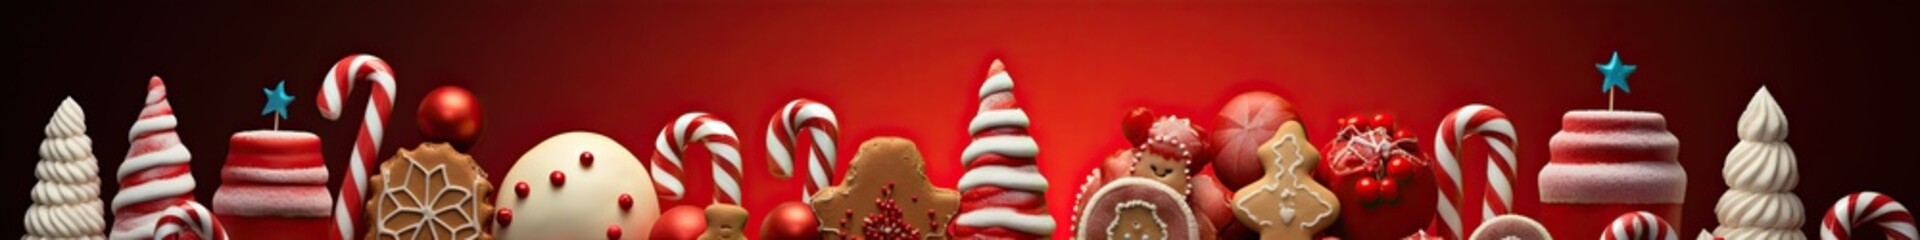 Christmas panoramic banner background with Christmas sweets, cakes, decorations